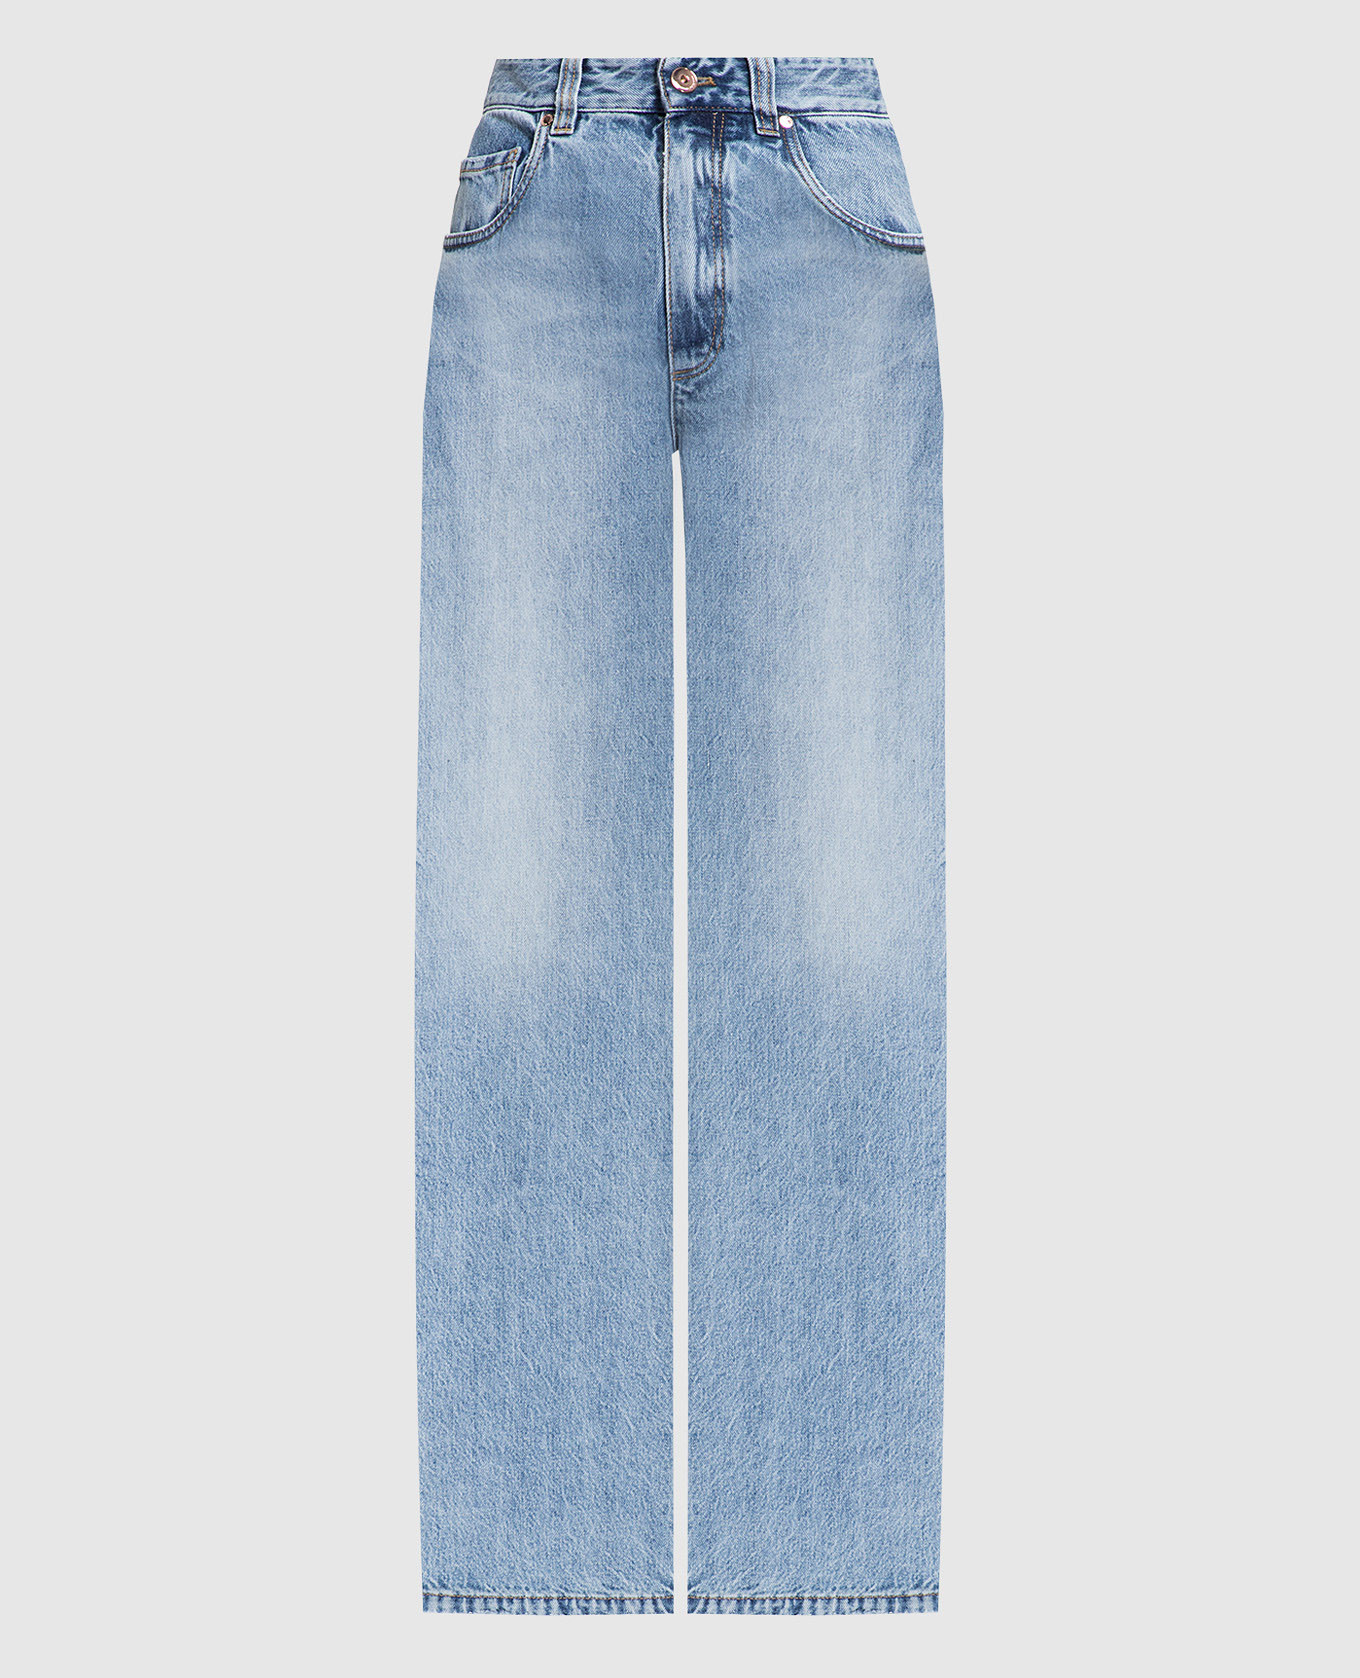 Blue jeans with a distressed effect